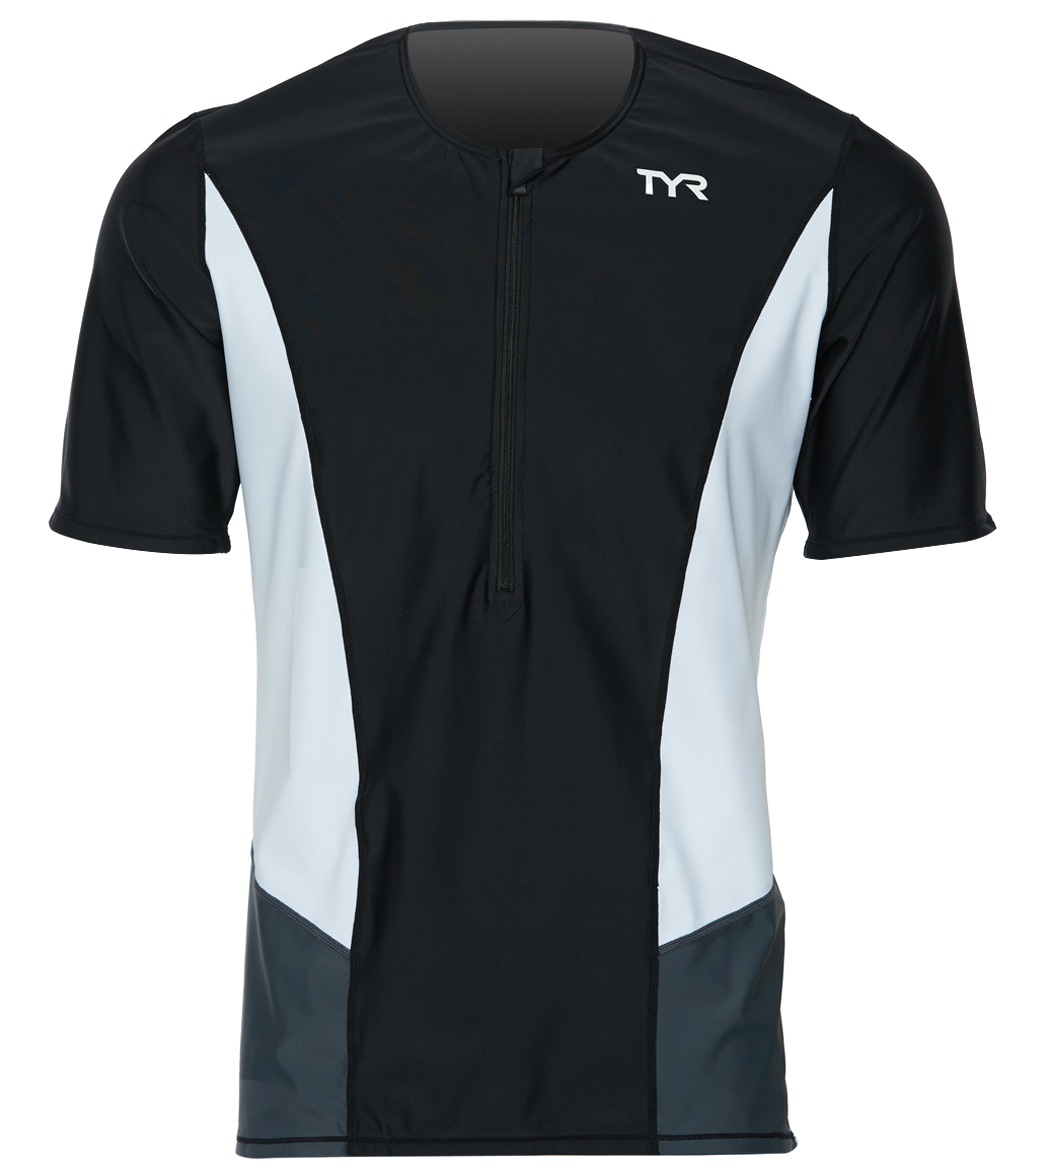 TYR Men's Competitor Short Sleeve Top - Blk/Wht Small - Swimoutlet.com